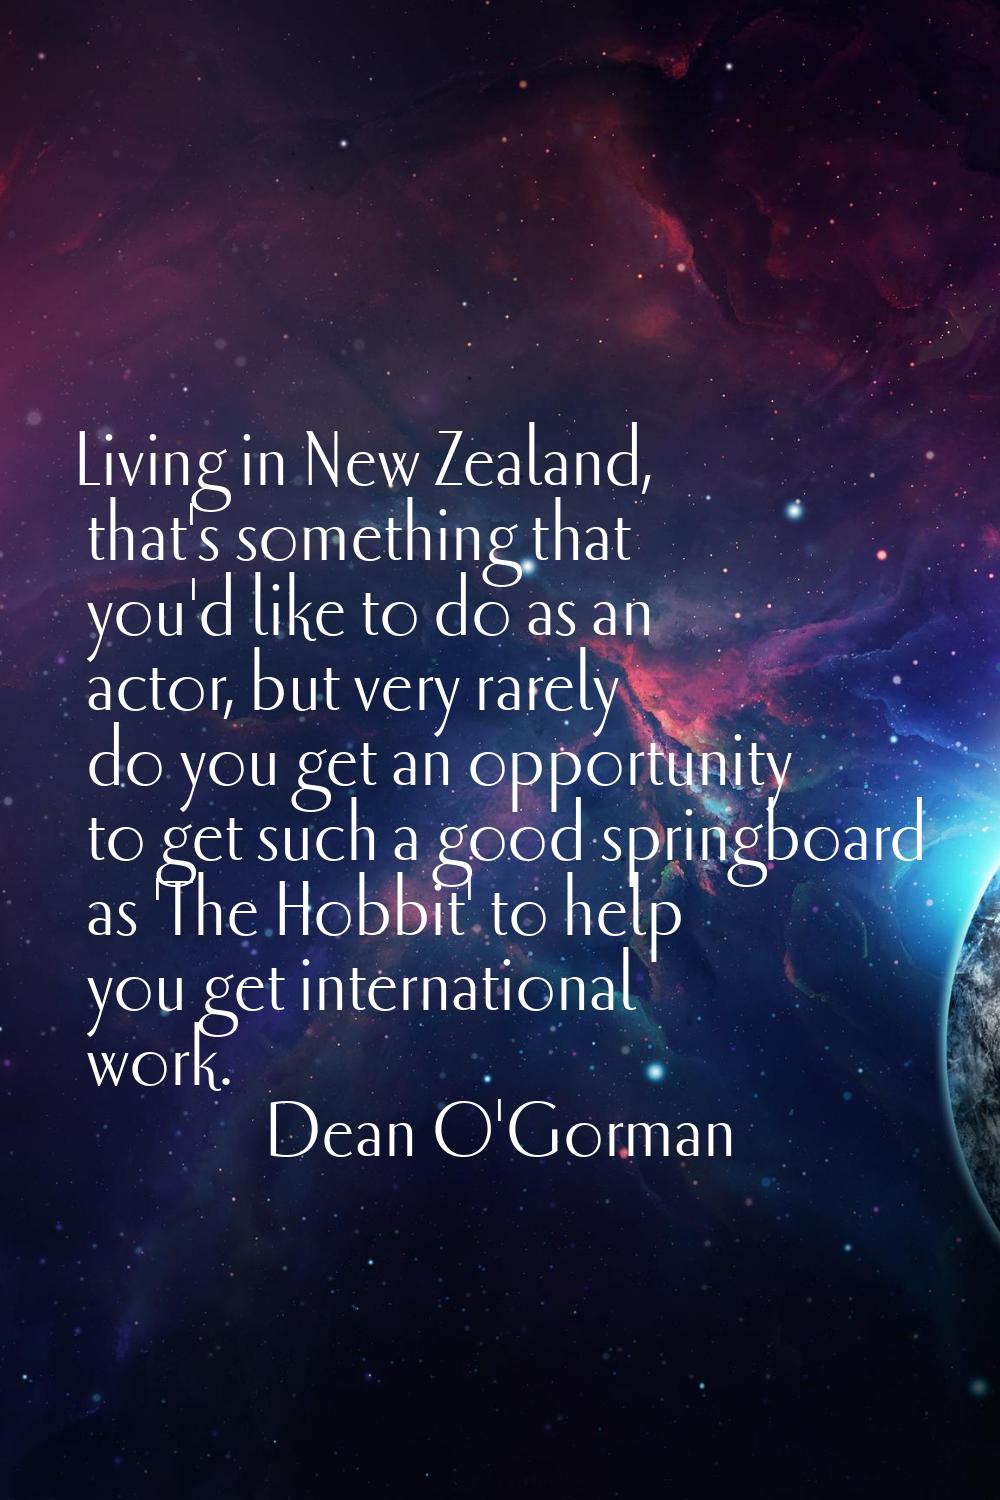 Living in New Zealand, that's something that you'd like to do as an actor, but very rarely do you g